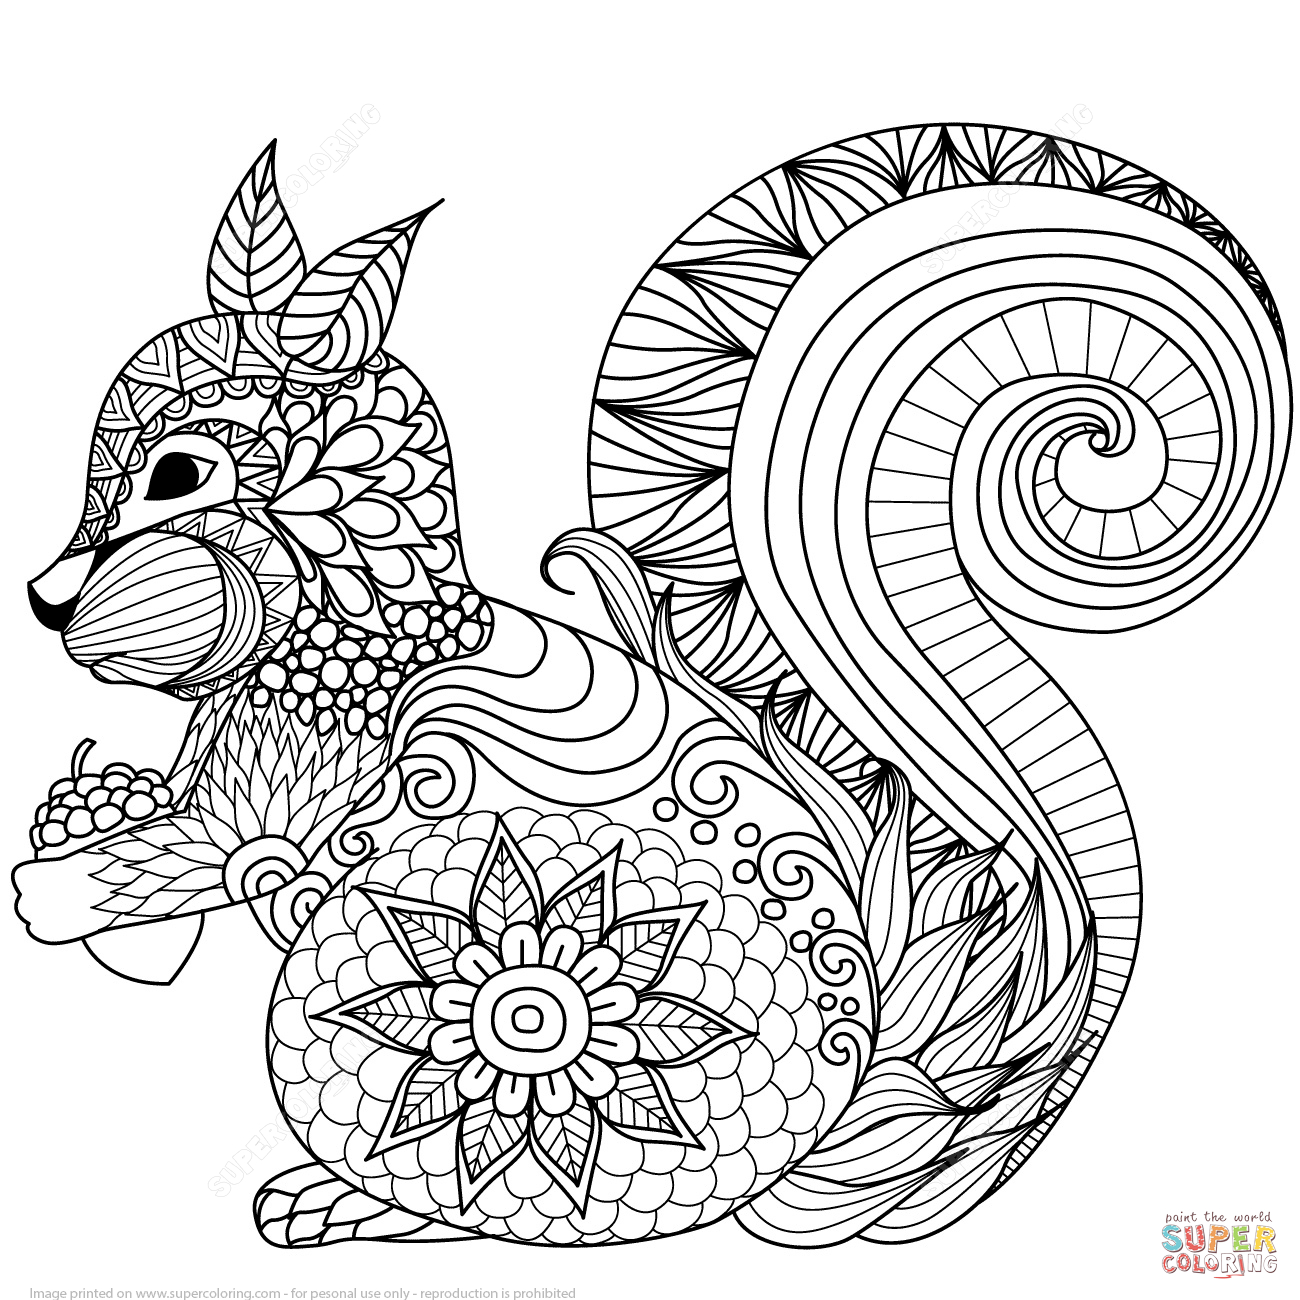 Lovely Squirrel Zentangle Coloring Page | Free Printable Coloring Pages - Free Printable Zen Coloring Pages